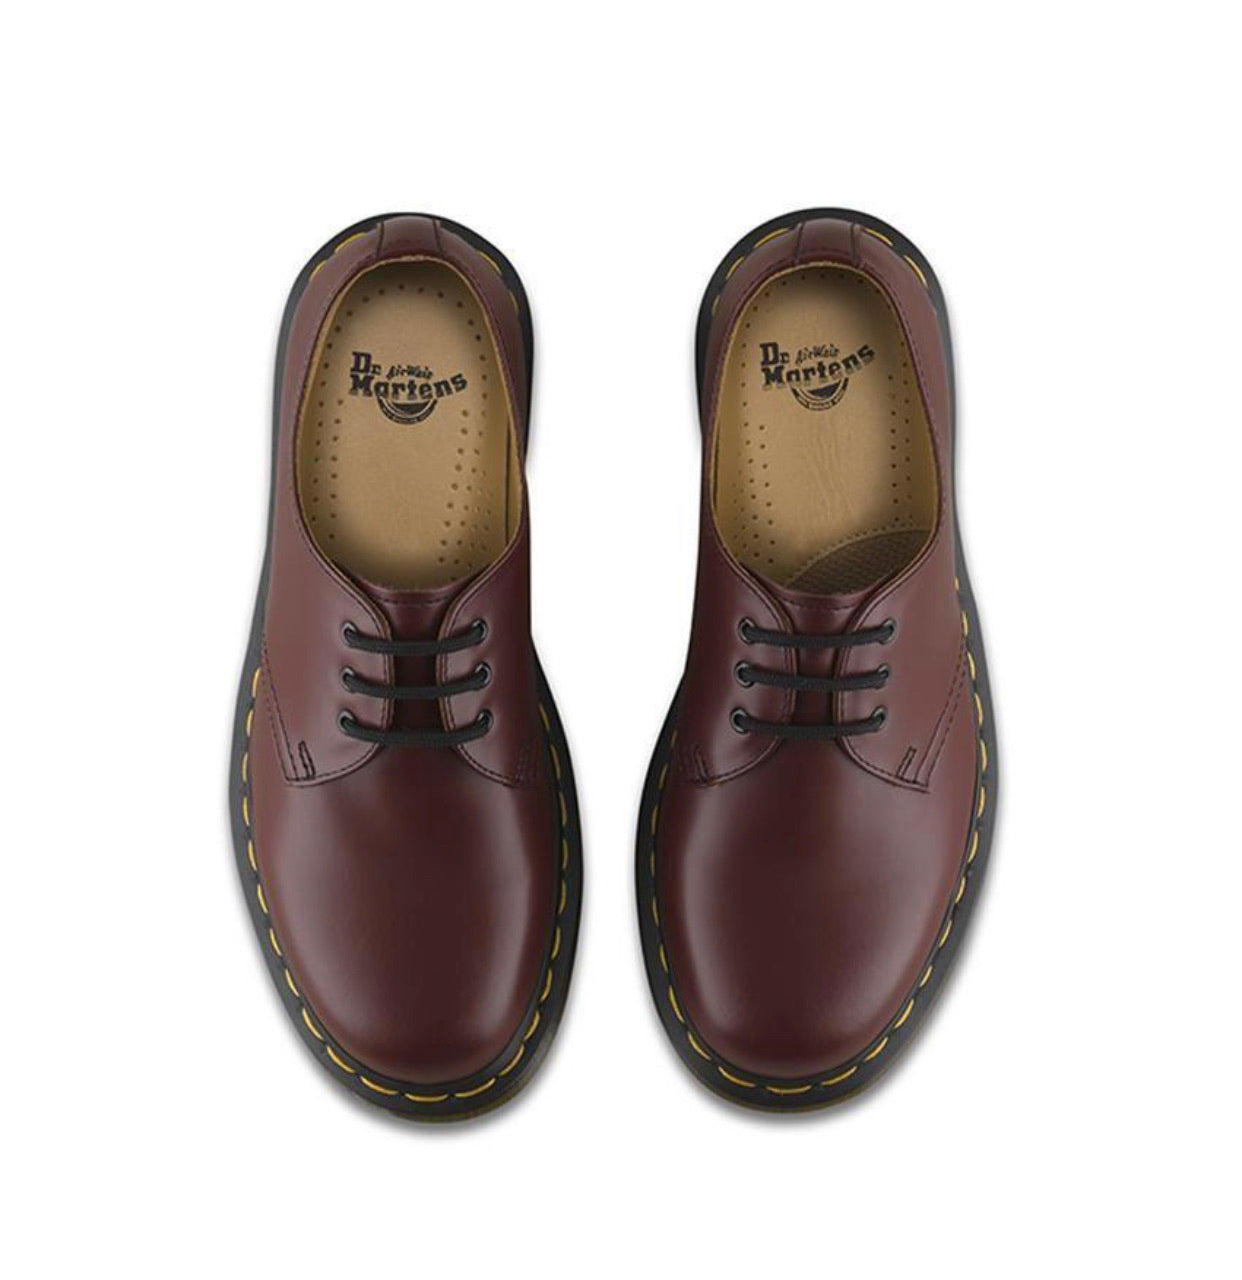 Dr. Martens 1461 Cherry Red Smooth 3 Eyelet Shoe